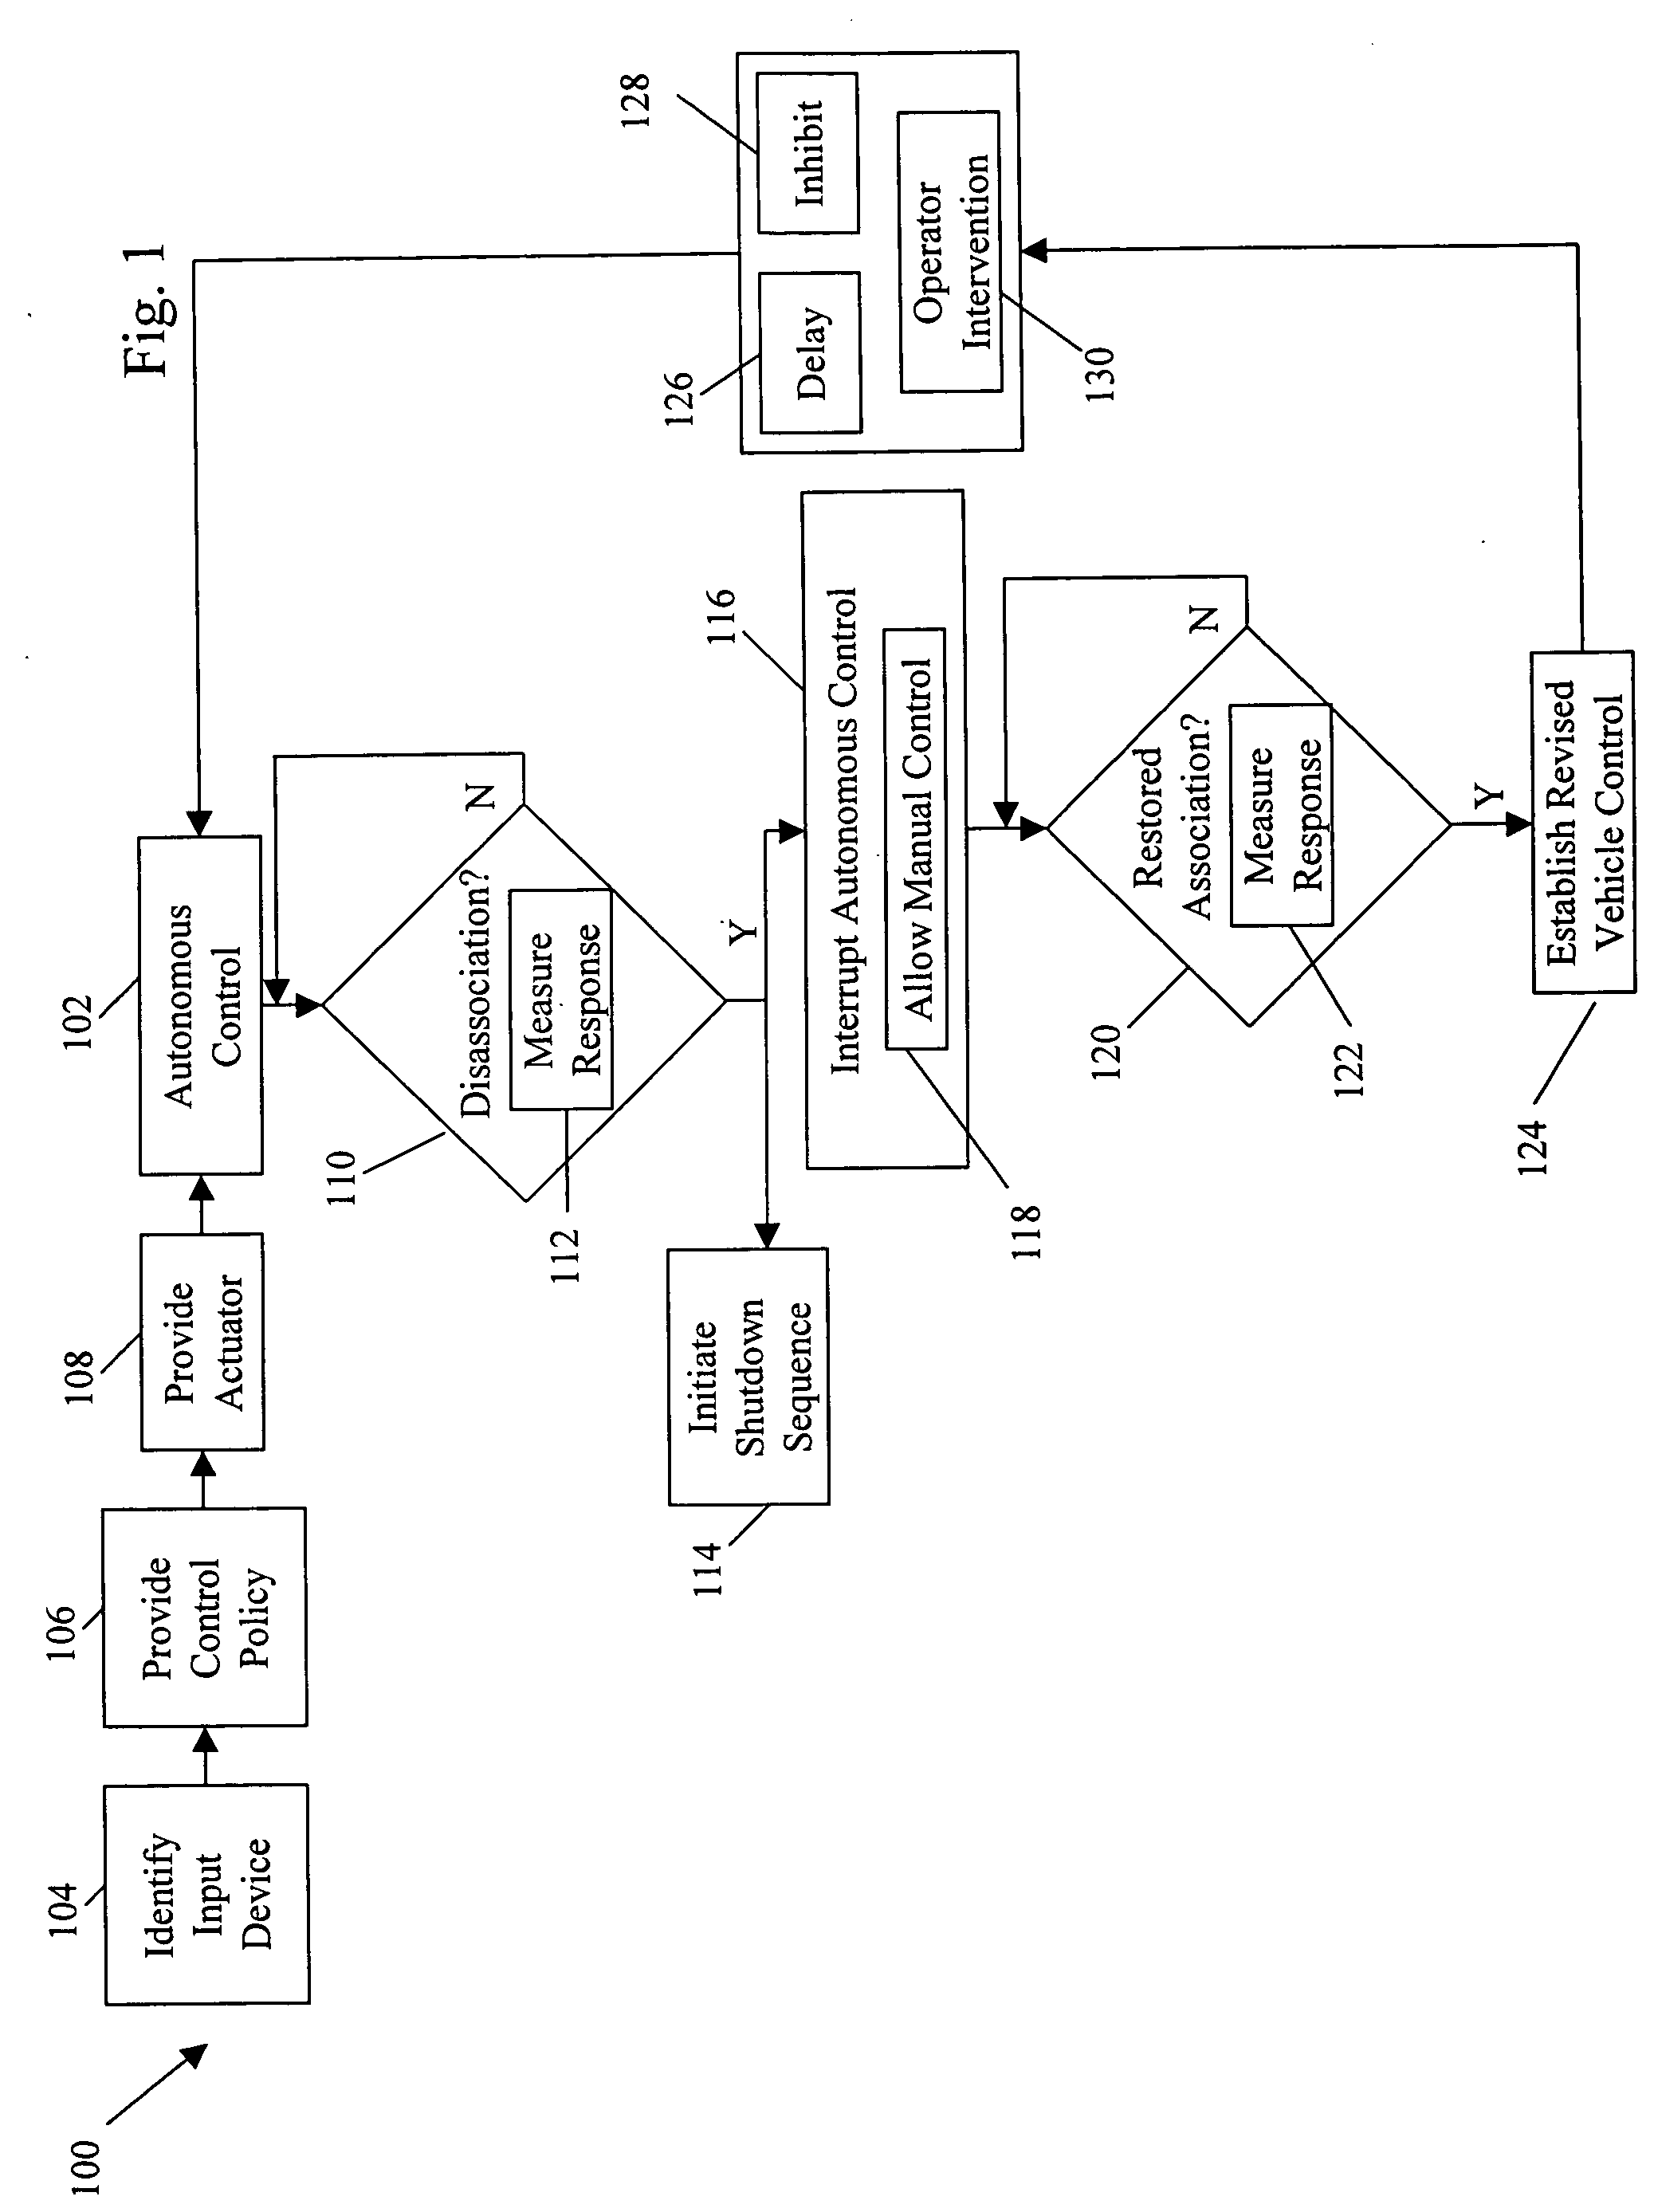 System and method for processing safety signals in an autonomous vehicle